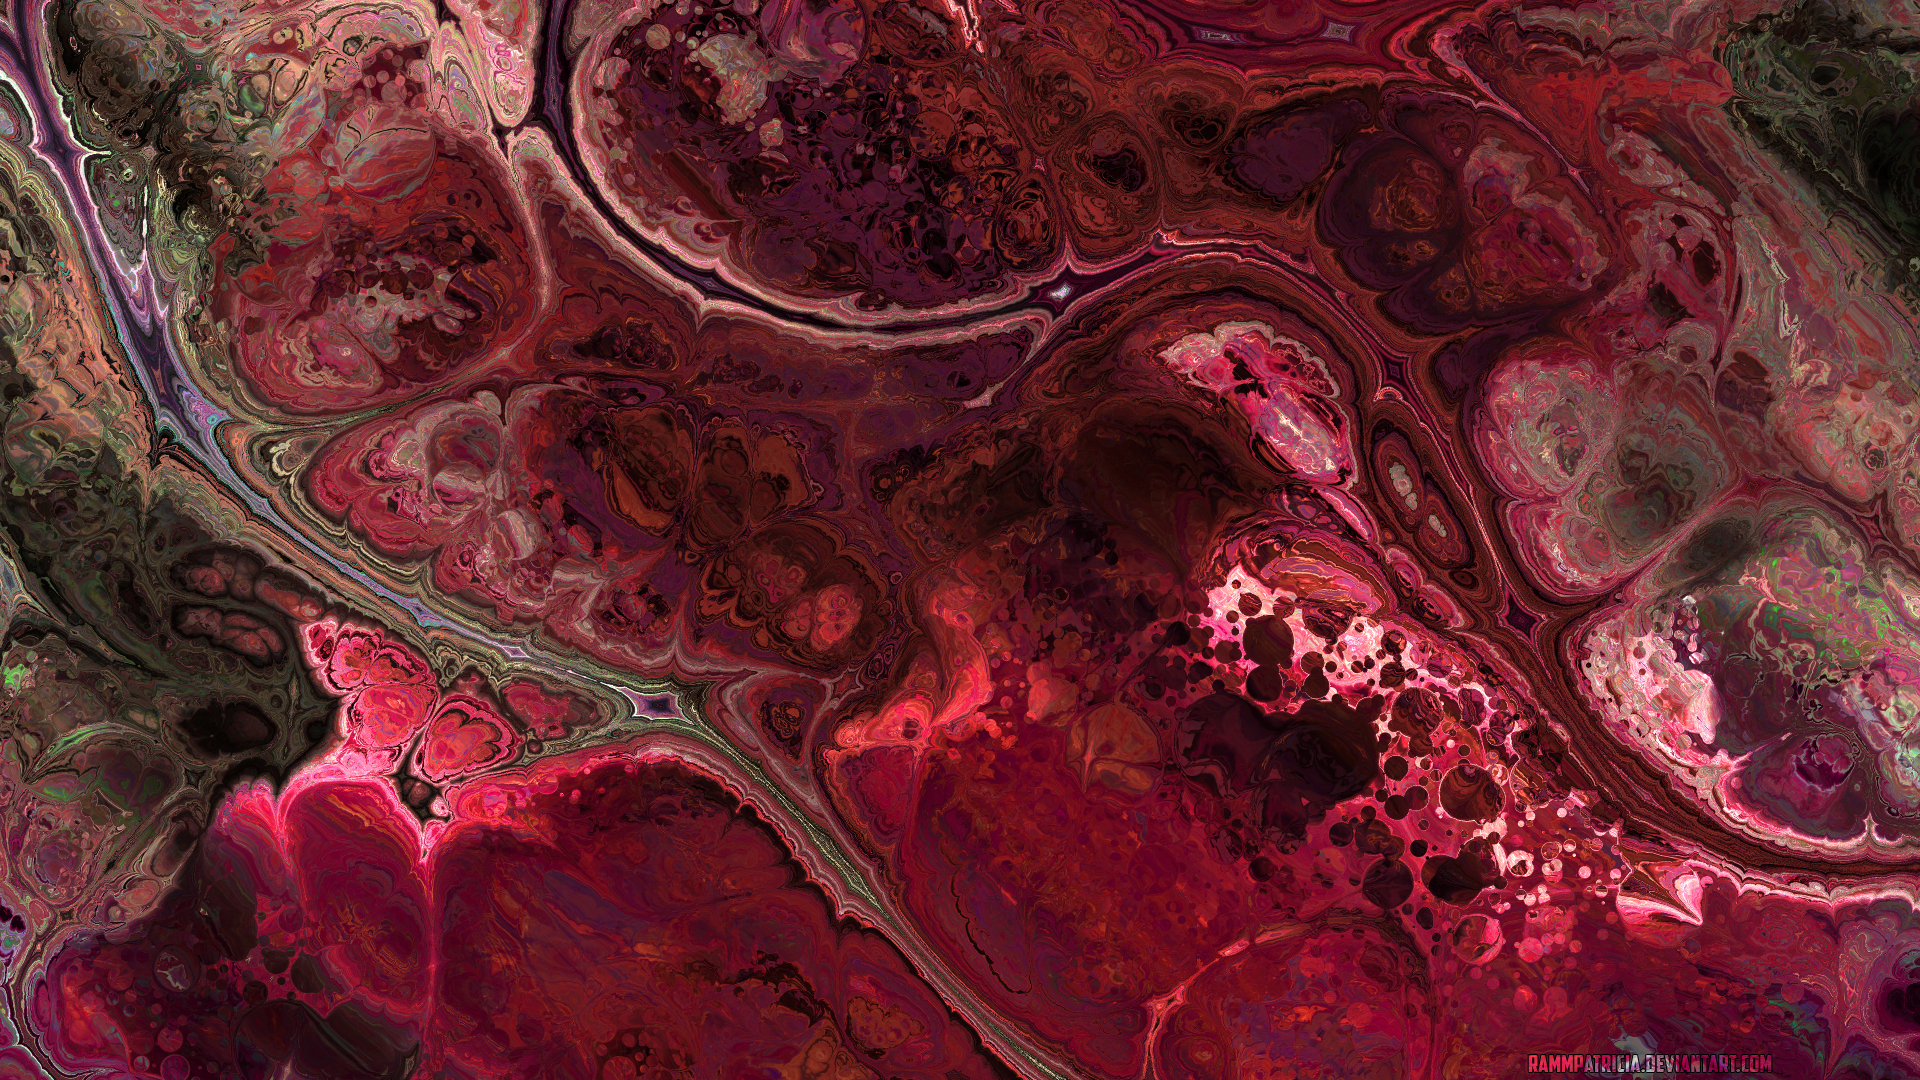 Abstract RammPatricia Digital Art Flesh Fluid Bubbles Watermarked Red 1920x1080